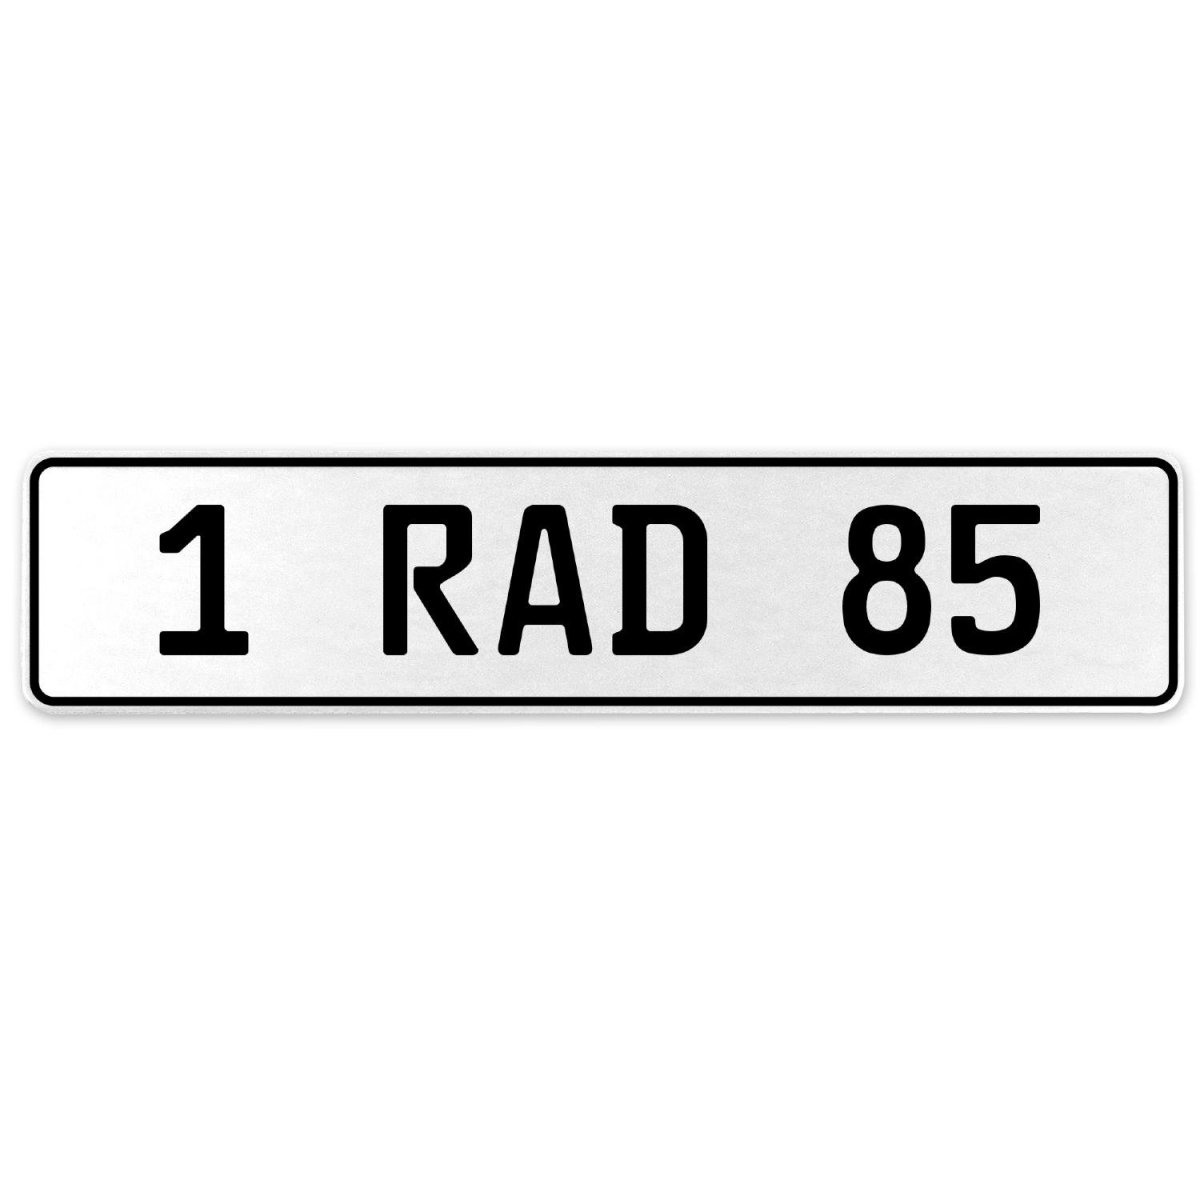 554088 1 Rad 85 - White Aluminum Street Sign Mancave Euro Plate Name Door Sign Wall